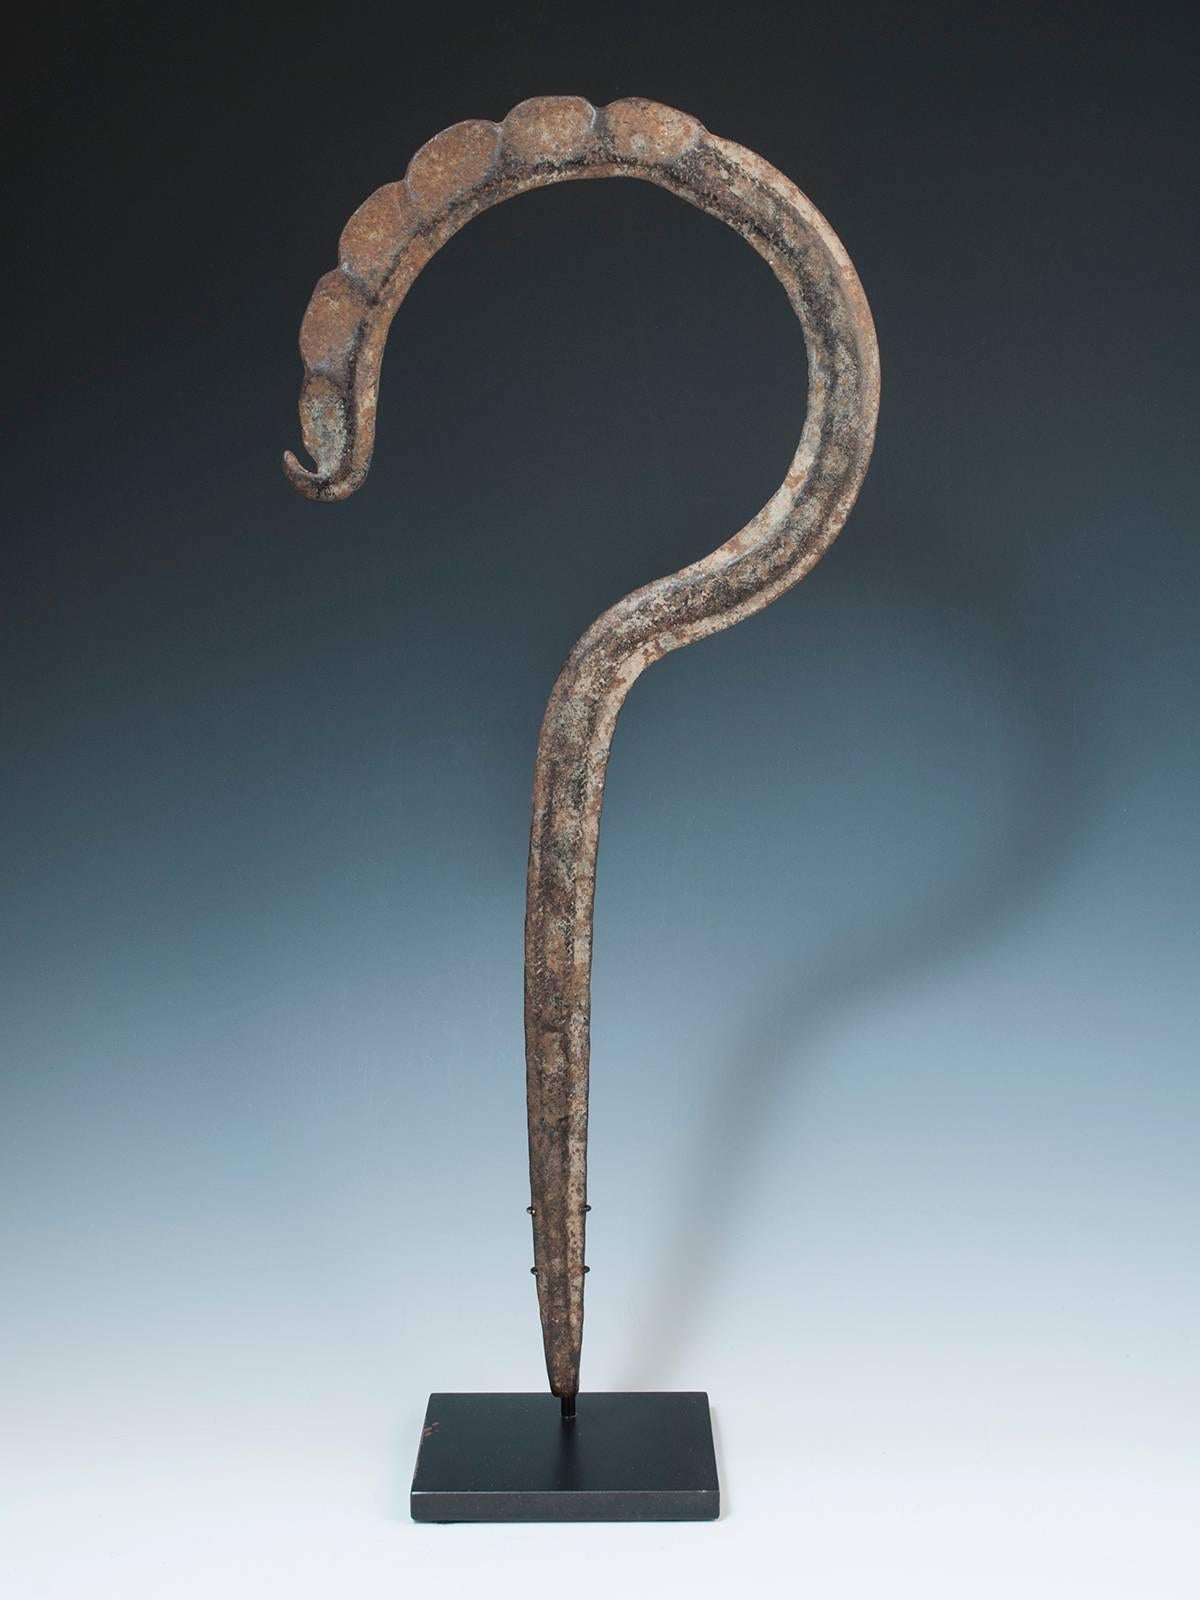 Rare late 19th century Tribal forged iron Hook Currency, Cameroon/ NE Nigeria, upper Banue River area

A graceful forged iron currency piece shaped like a question mark or a fiddle head fern; comes with a custom base.